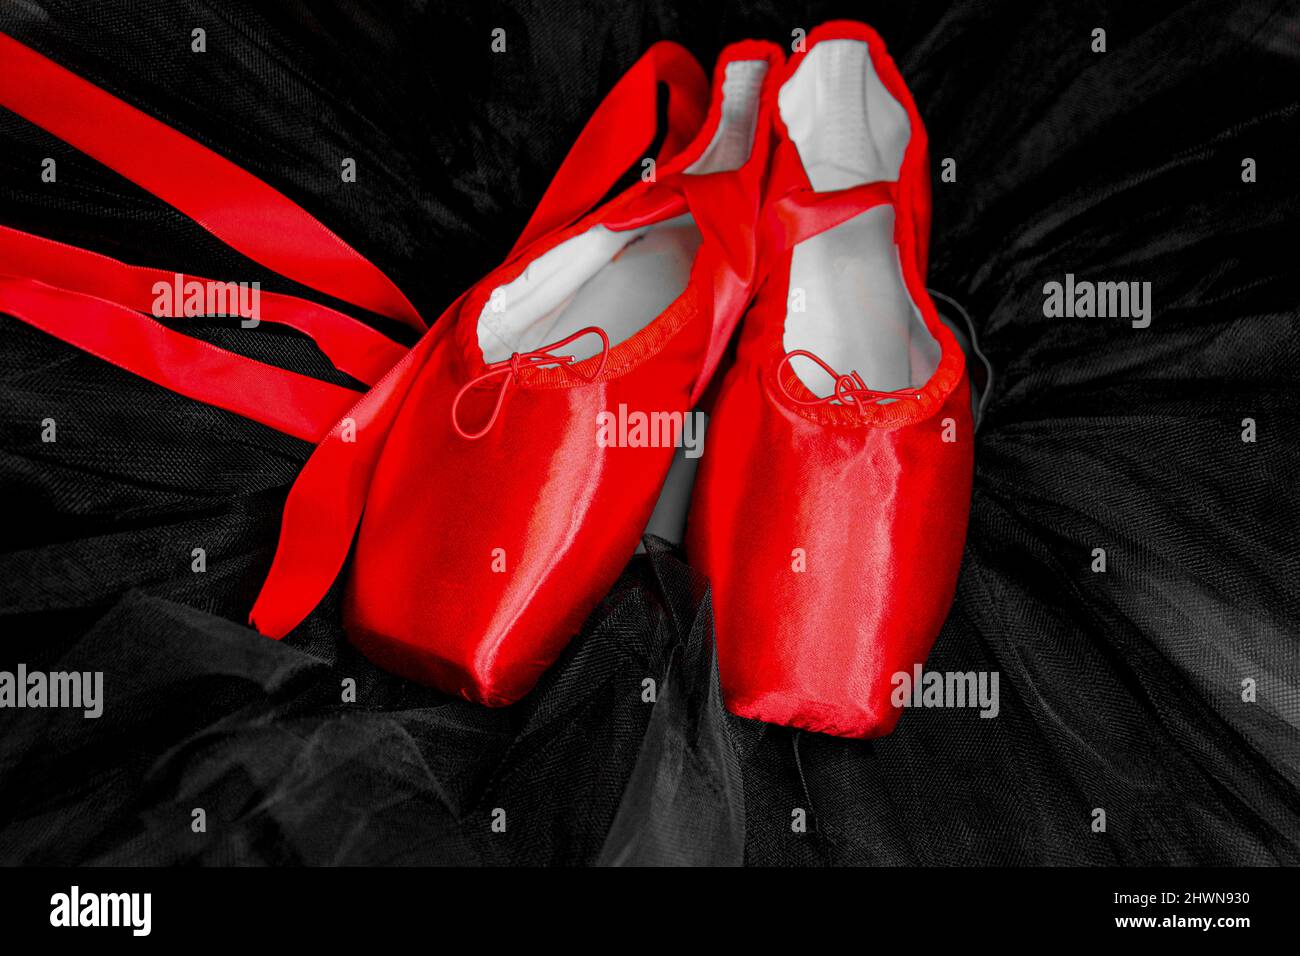 Red ballet pointe shoes set on top of a black tutu. Stock Photo